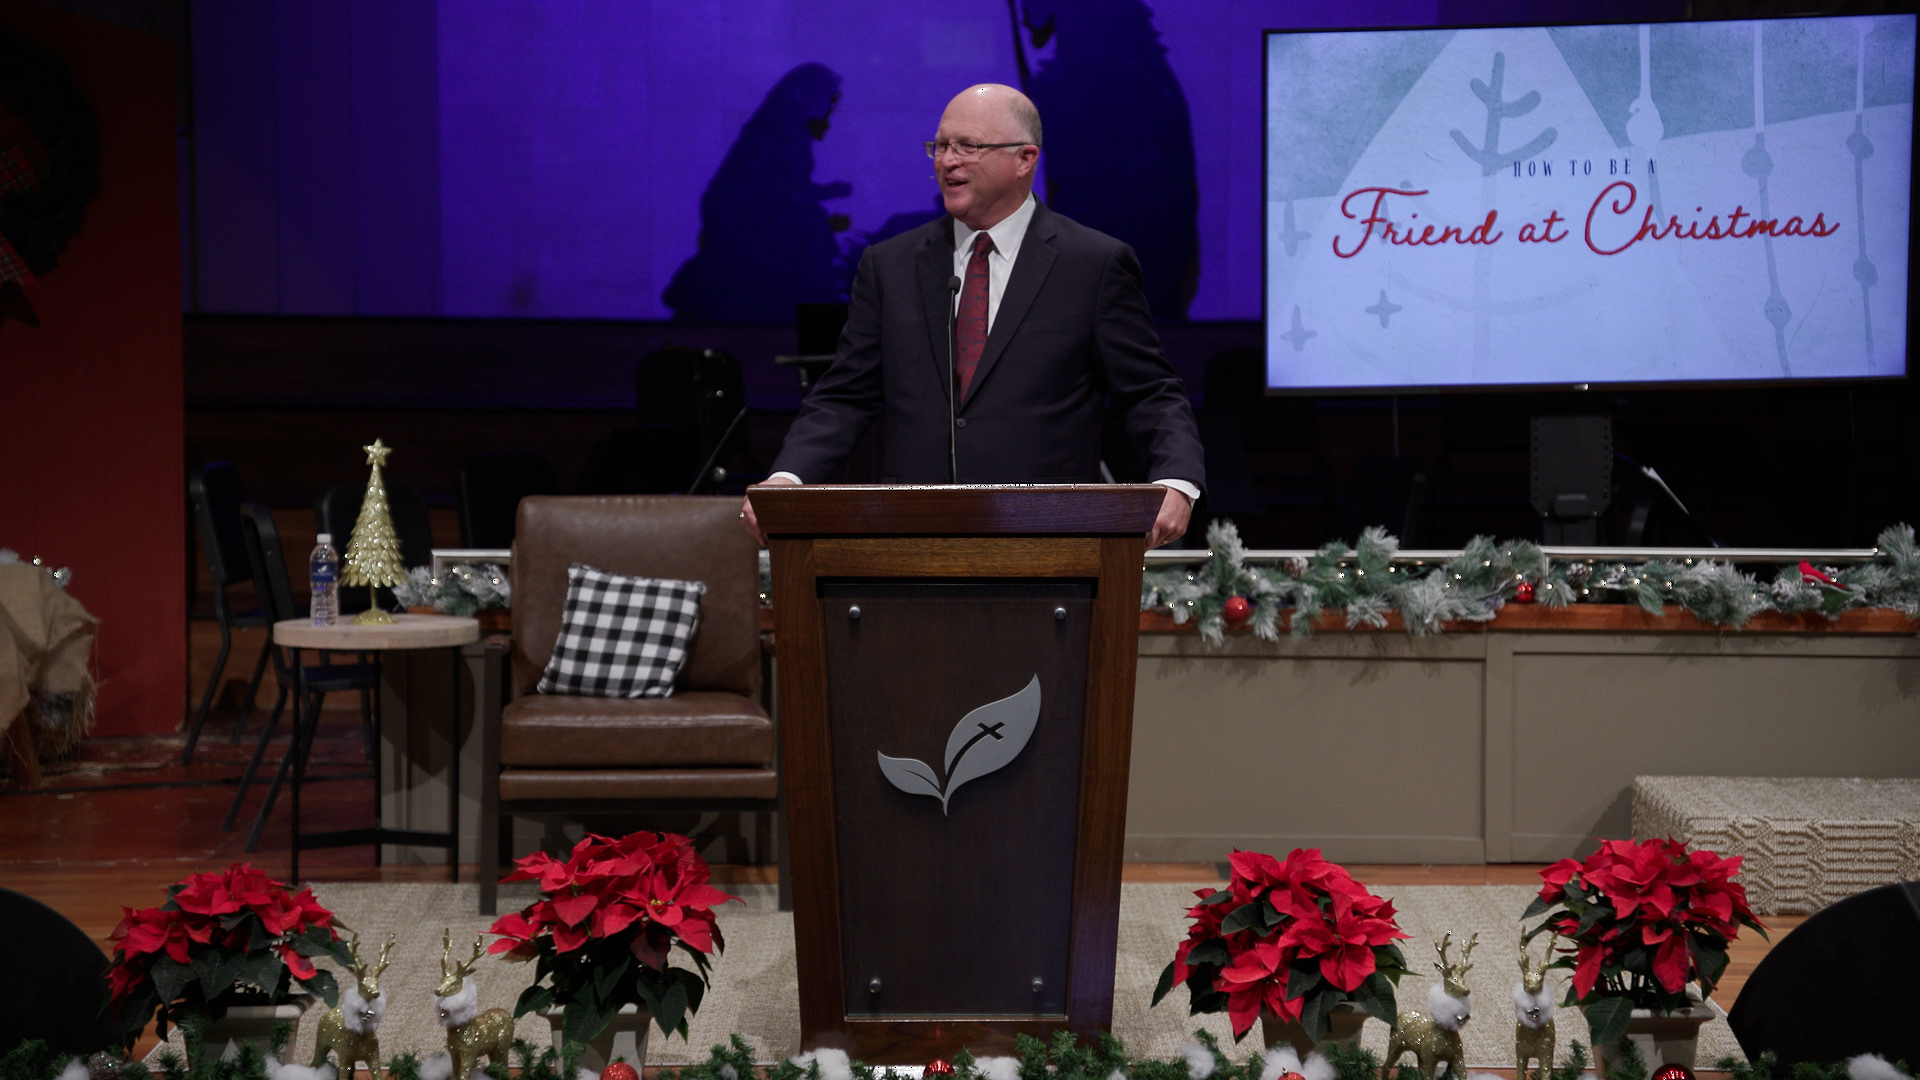 Pastor Paul Chappell: How To Be A Friend At Christmas